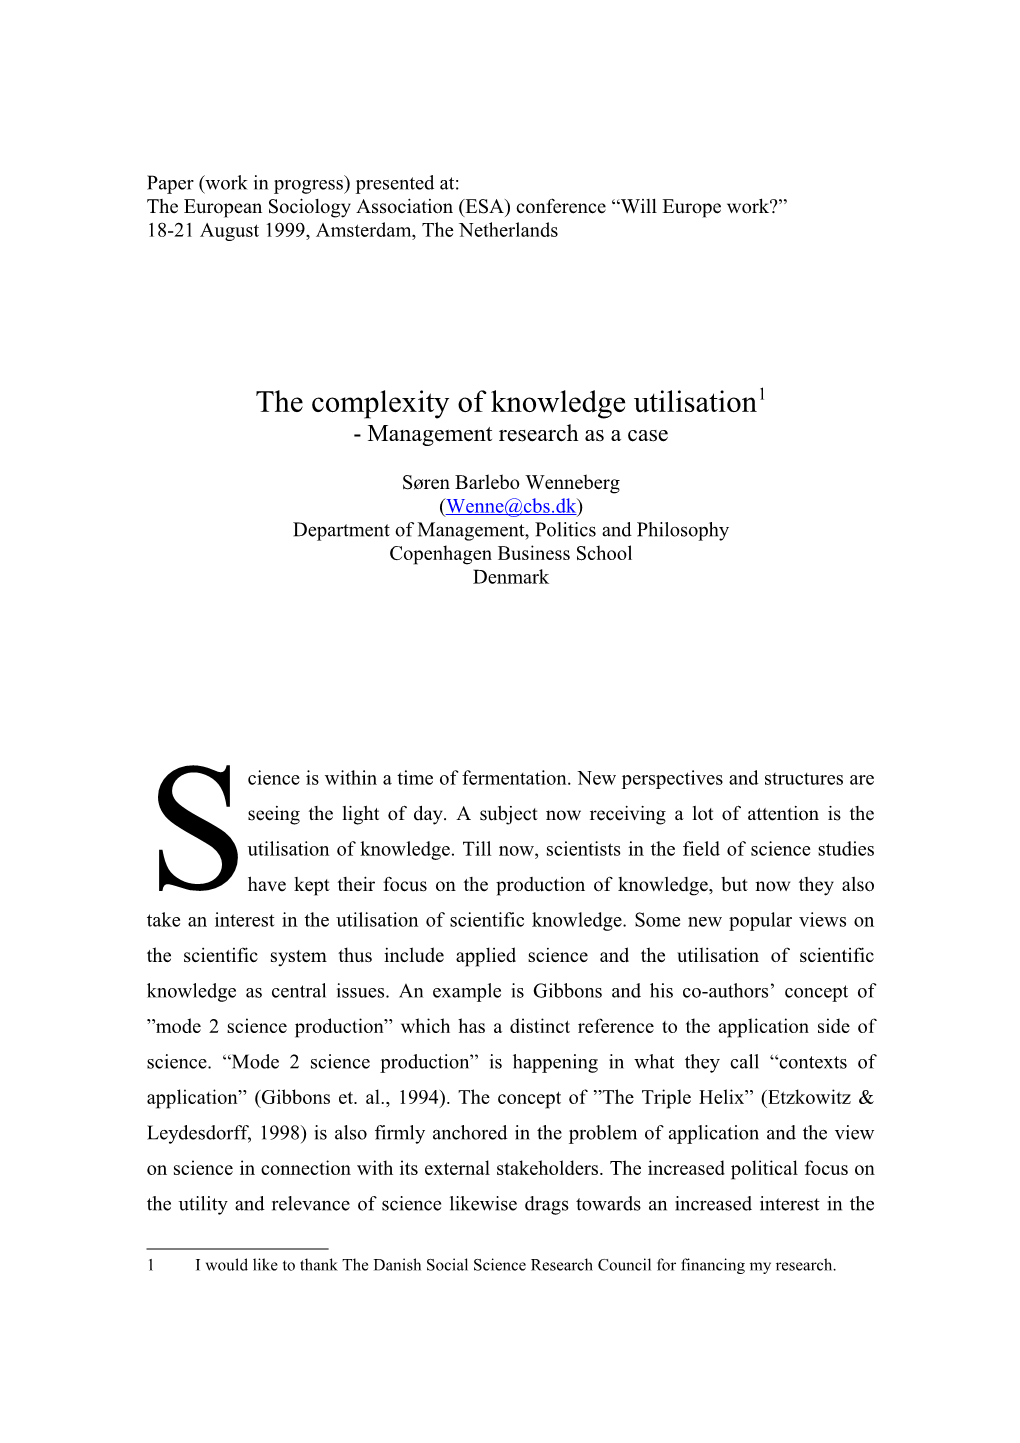 The Complexity of Knowledge Utilization